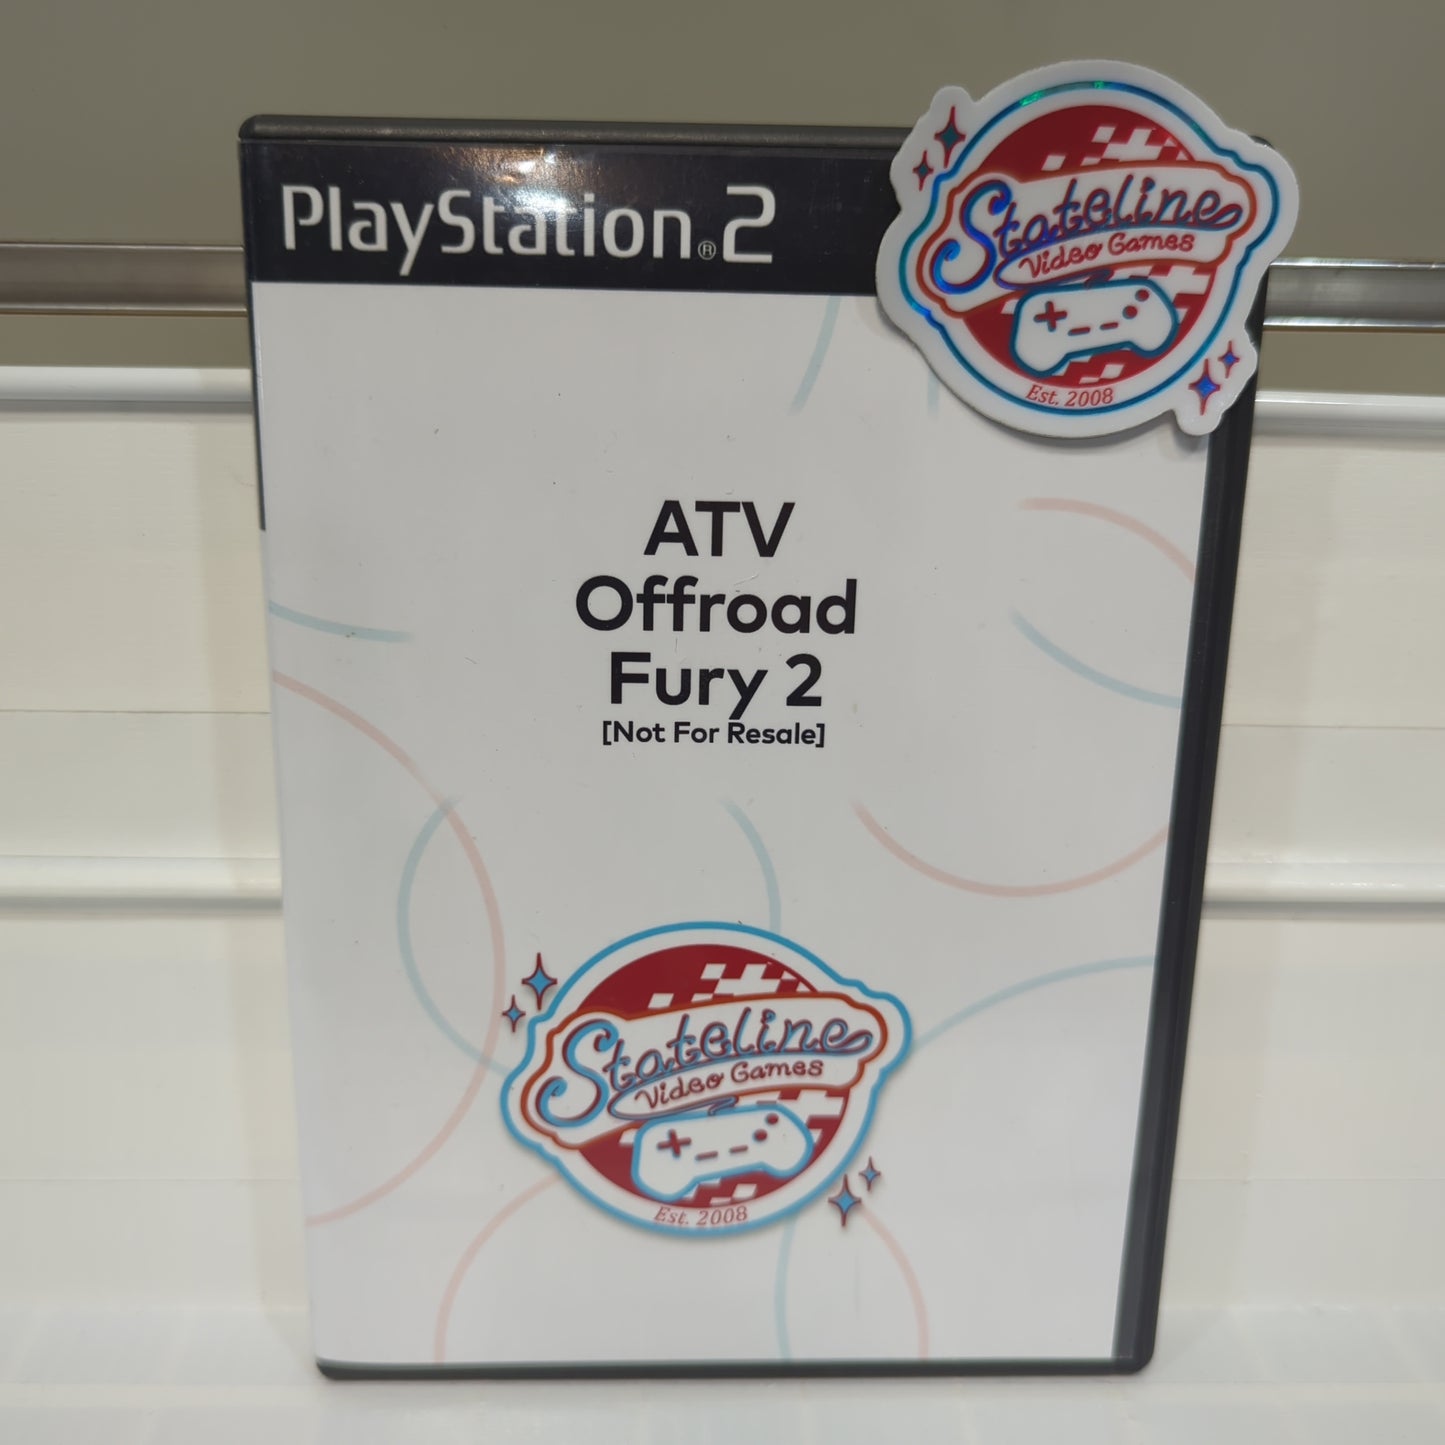 ATV Offroad Fury 2 [Not for Resale] - Playstation 2